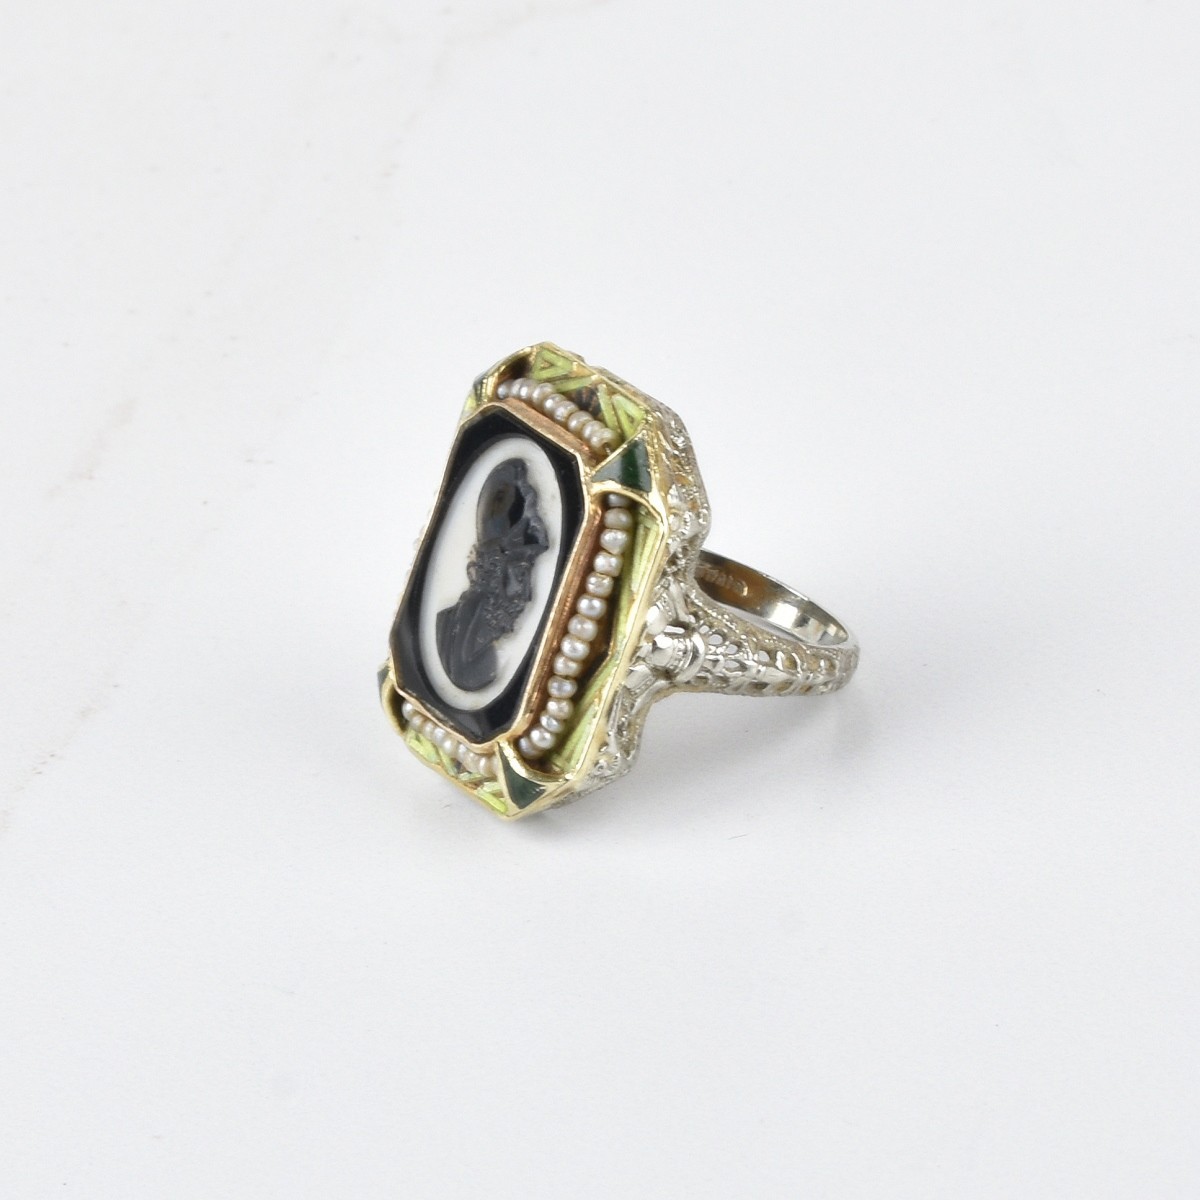 Antique Cameo and 14K Ring